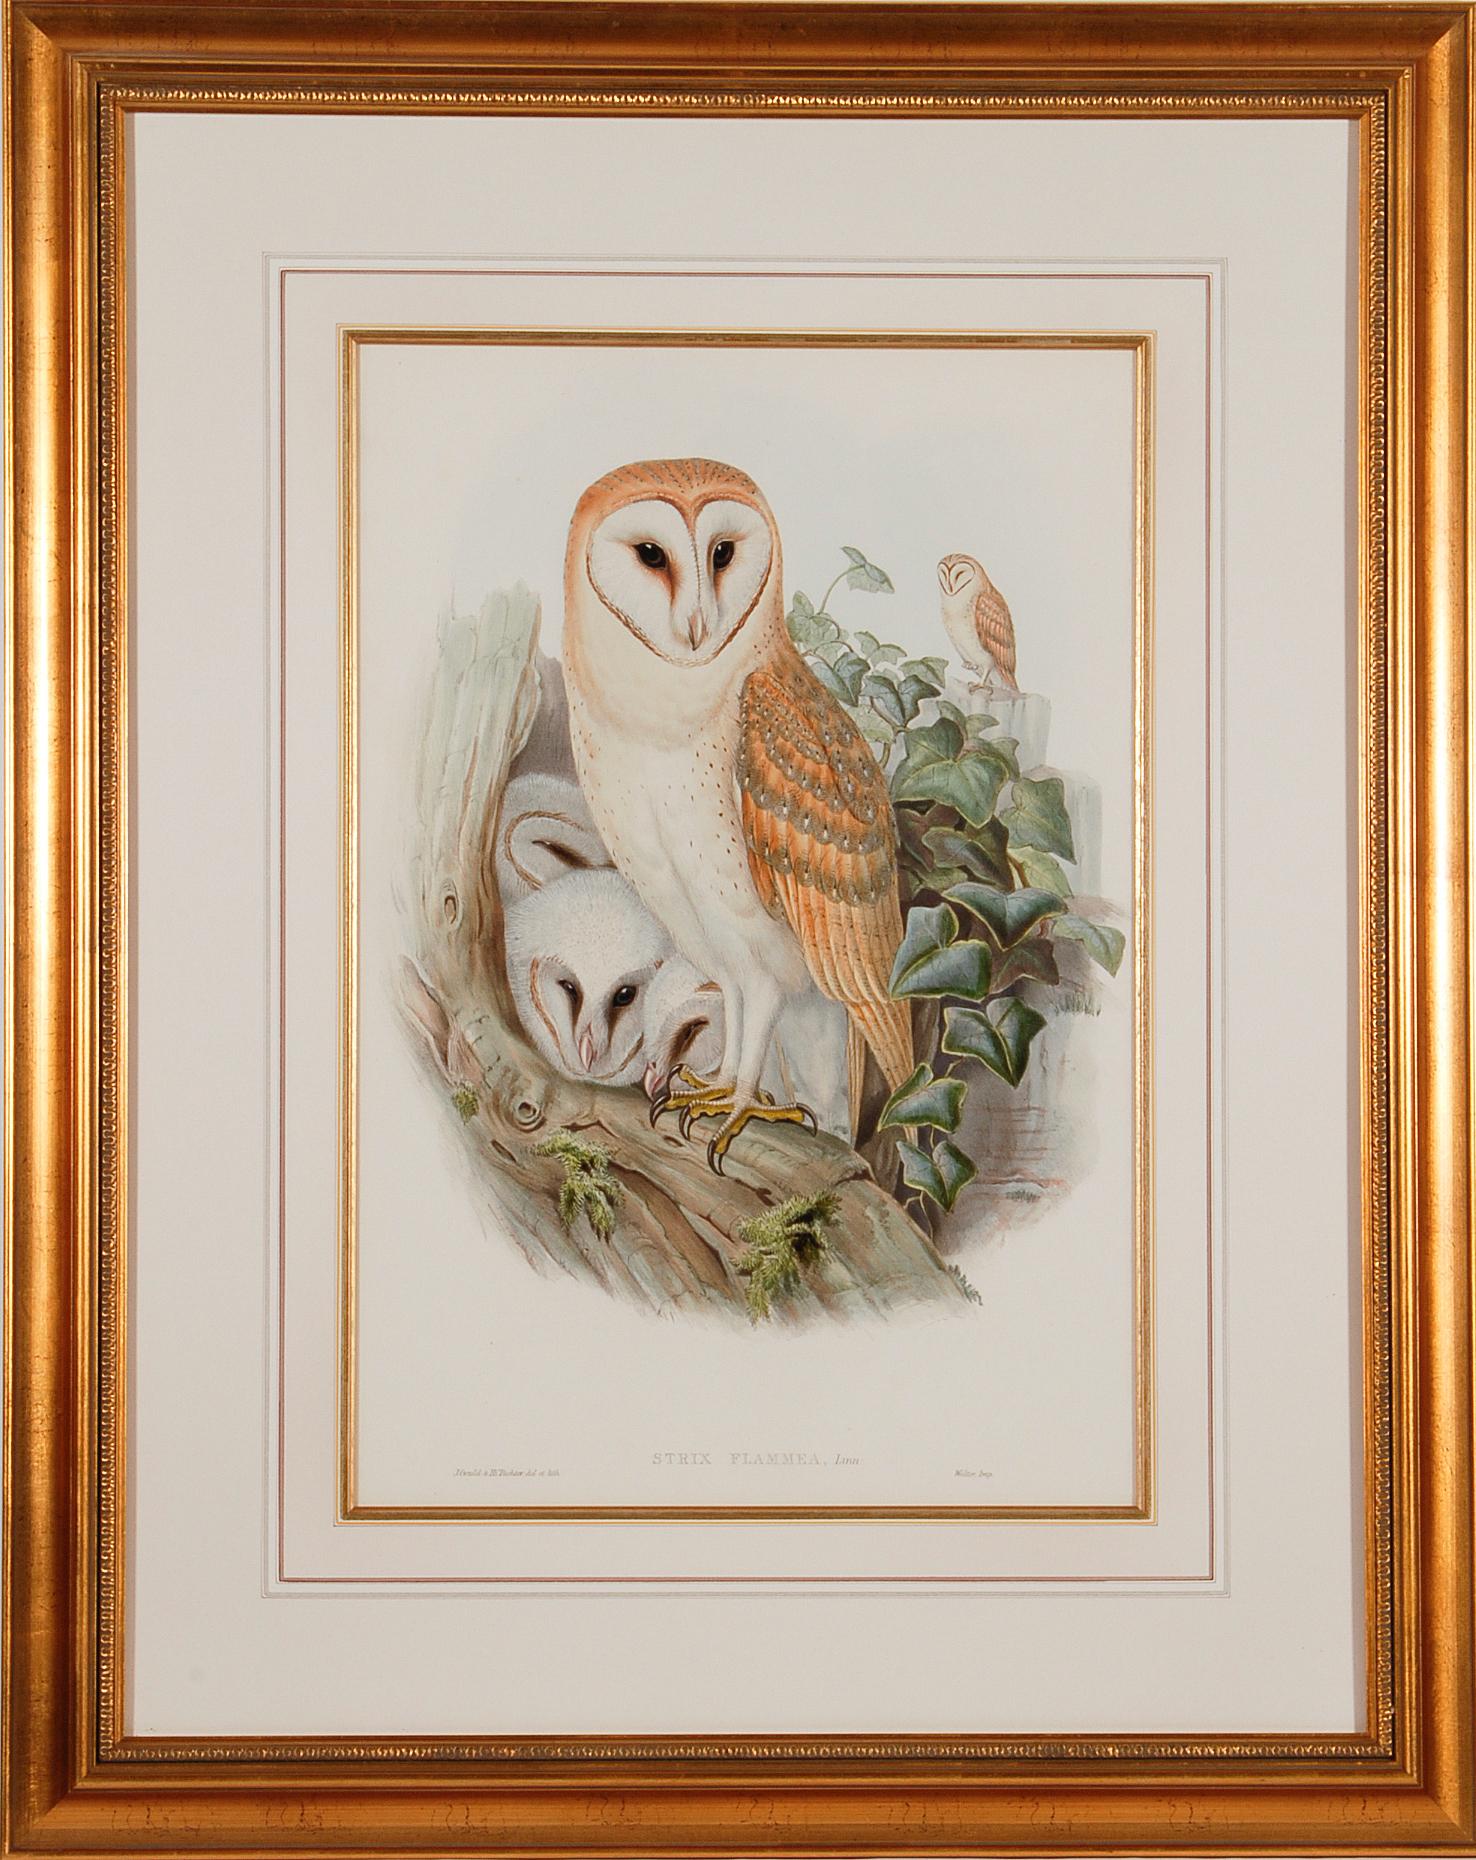 John Gould and Henry Constantine Richter Landscape Print - Barn Owl Family: A Framed Original 19th C. Hand-colored Lithograph by Gould